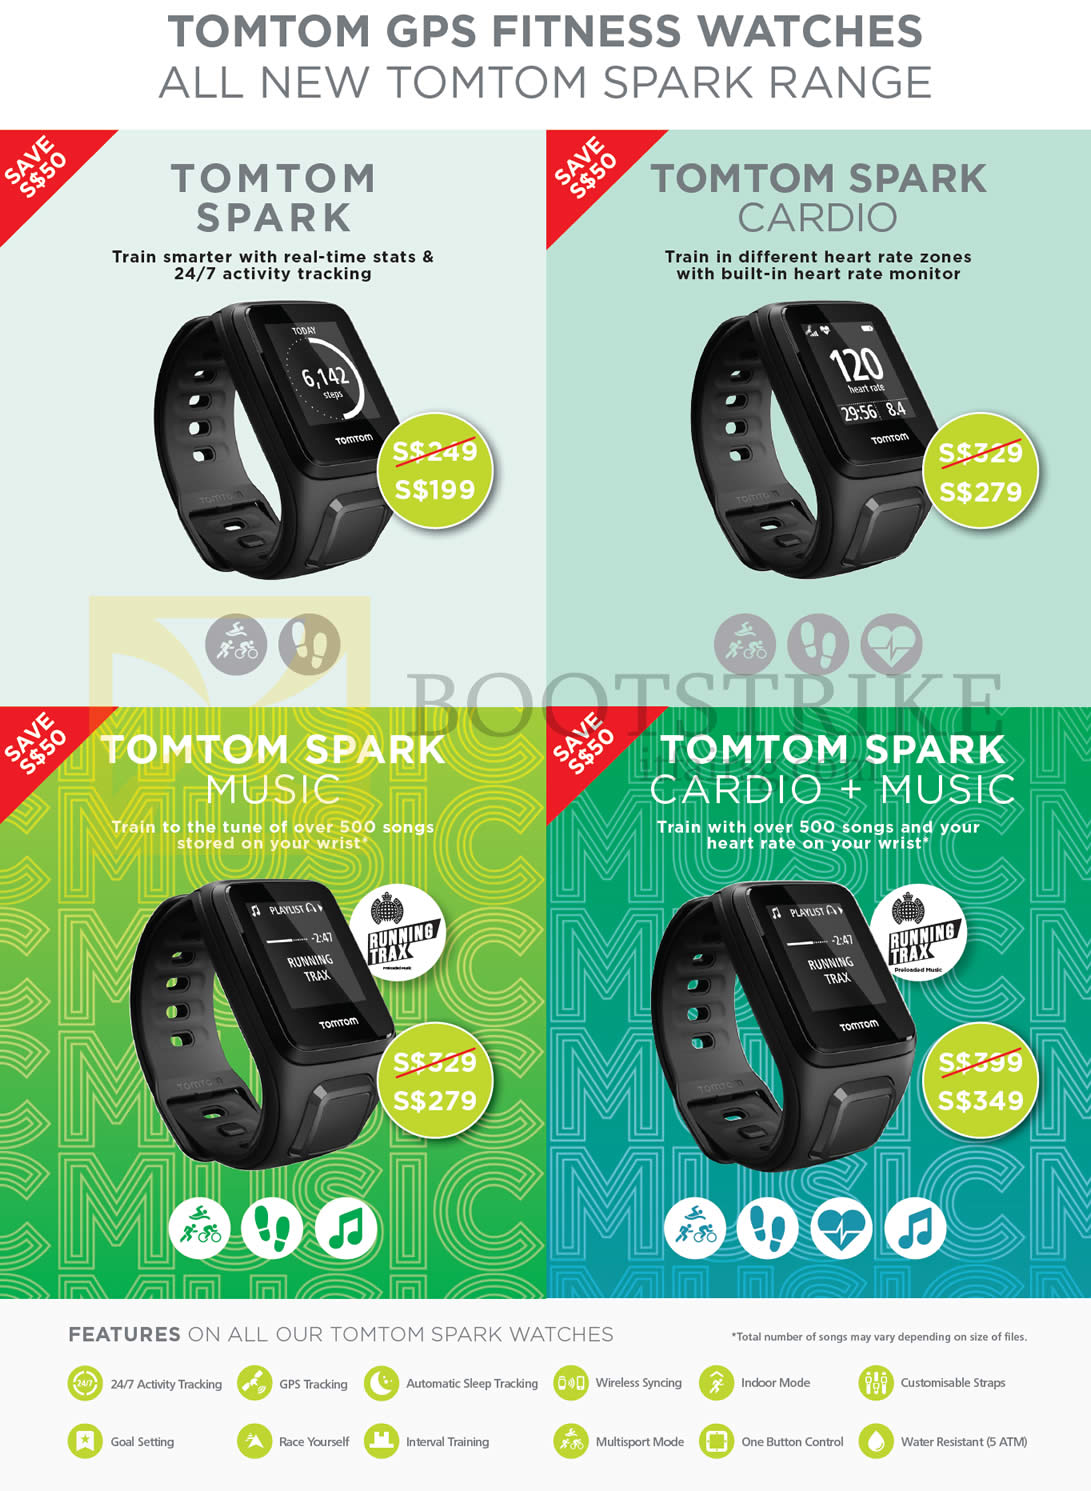 PC SHOW 2016 price list image brochure of TomTom GPS Fitness Watches, Spark, Spark Cardio, Spark Music, Spark Cardio N Music